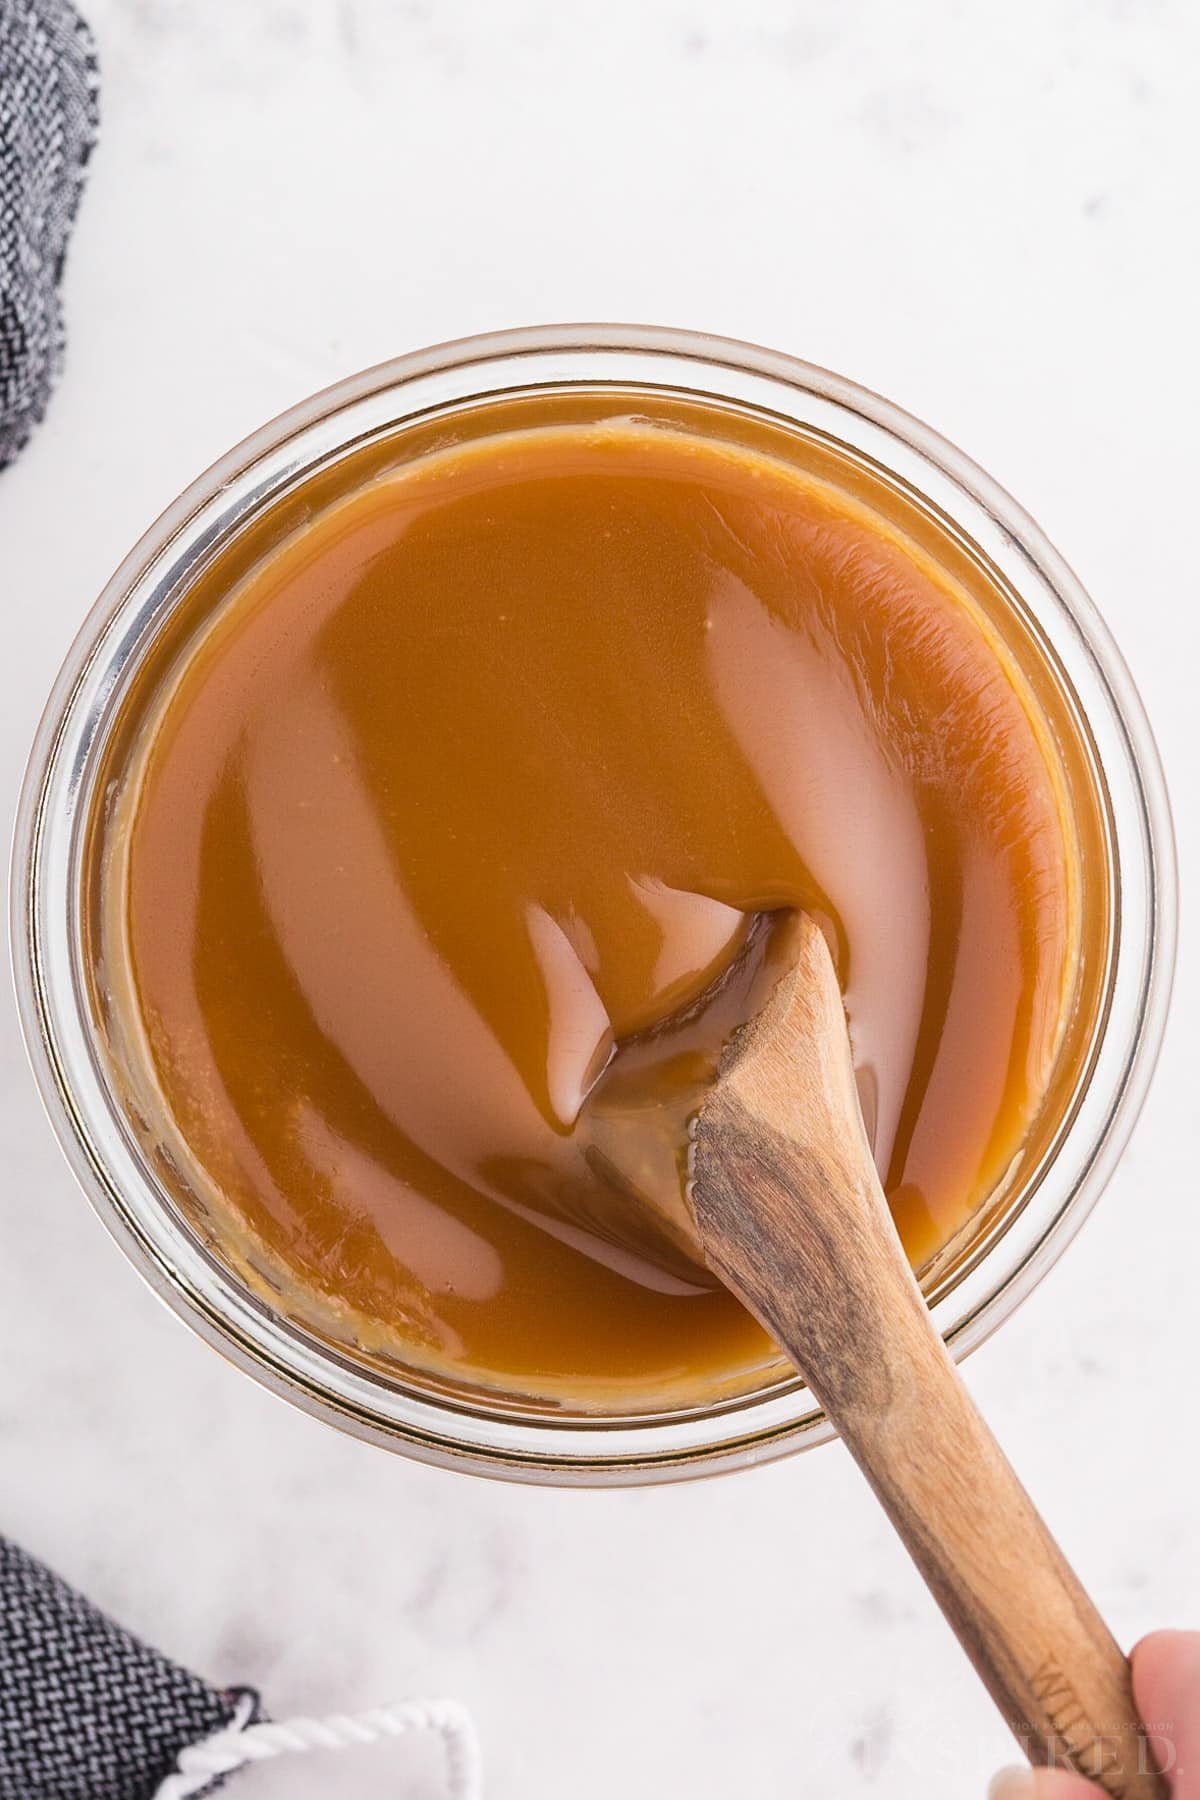 Overhead view of brown sugar caramel sauce in a glass jar with wooden stirring spoon.